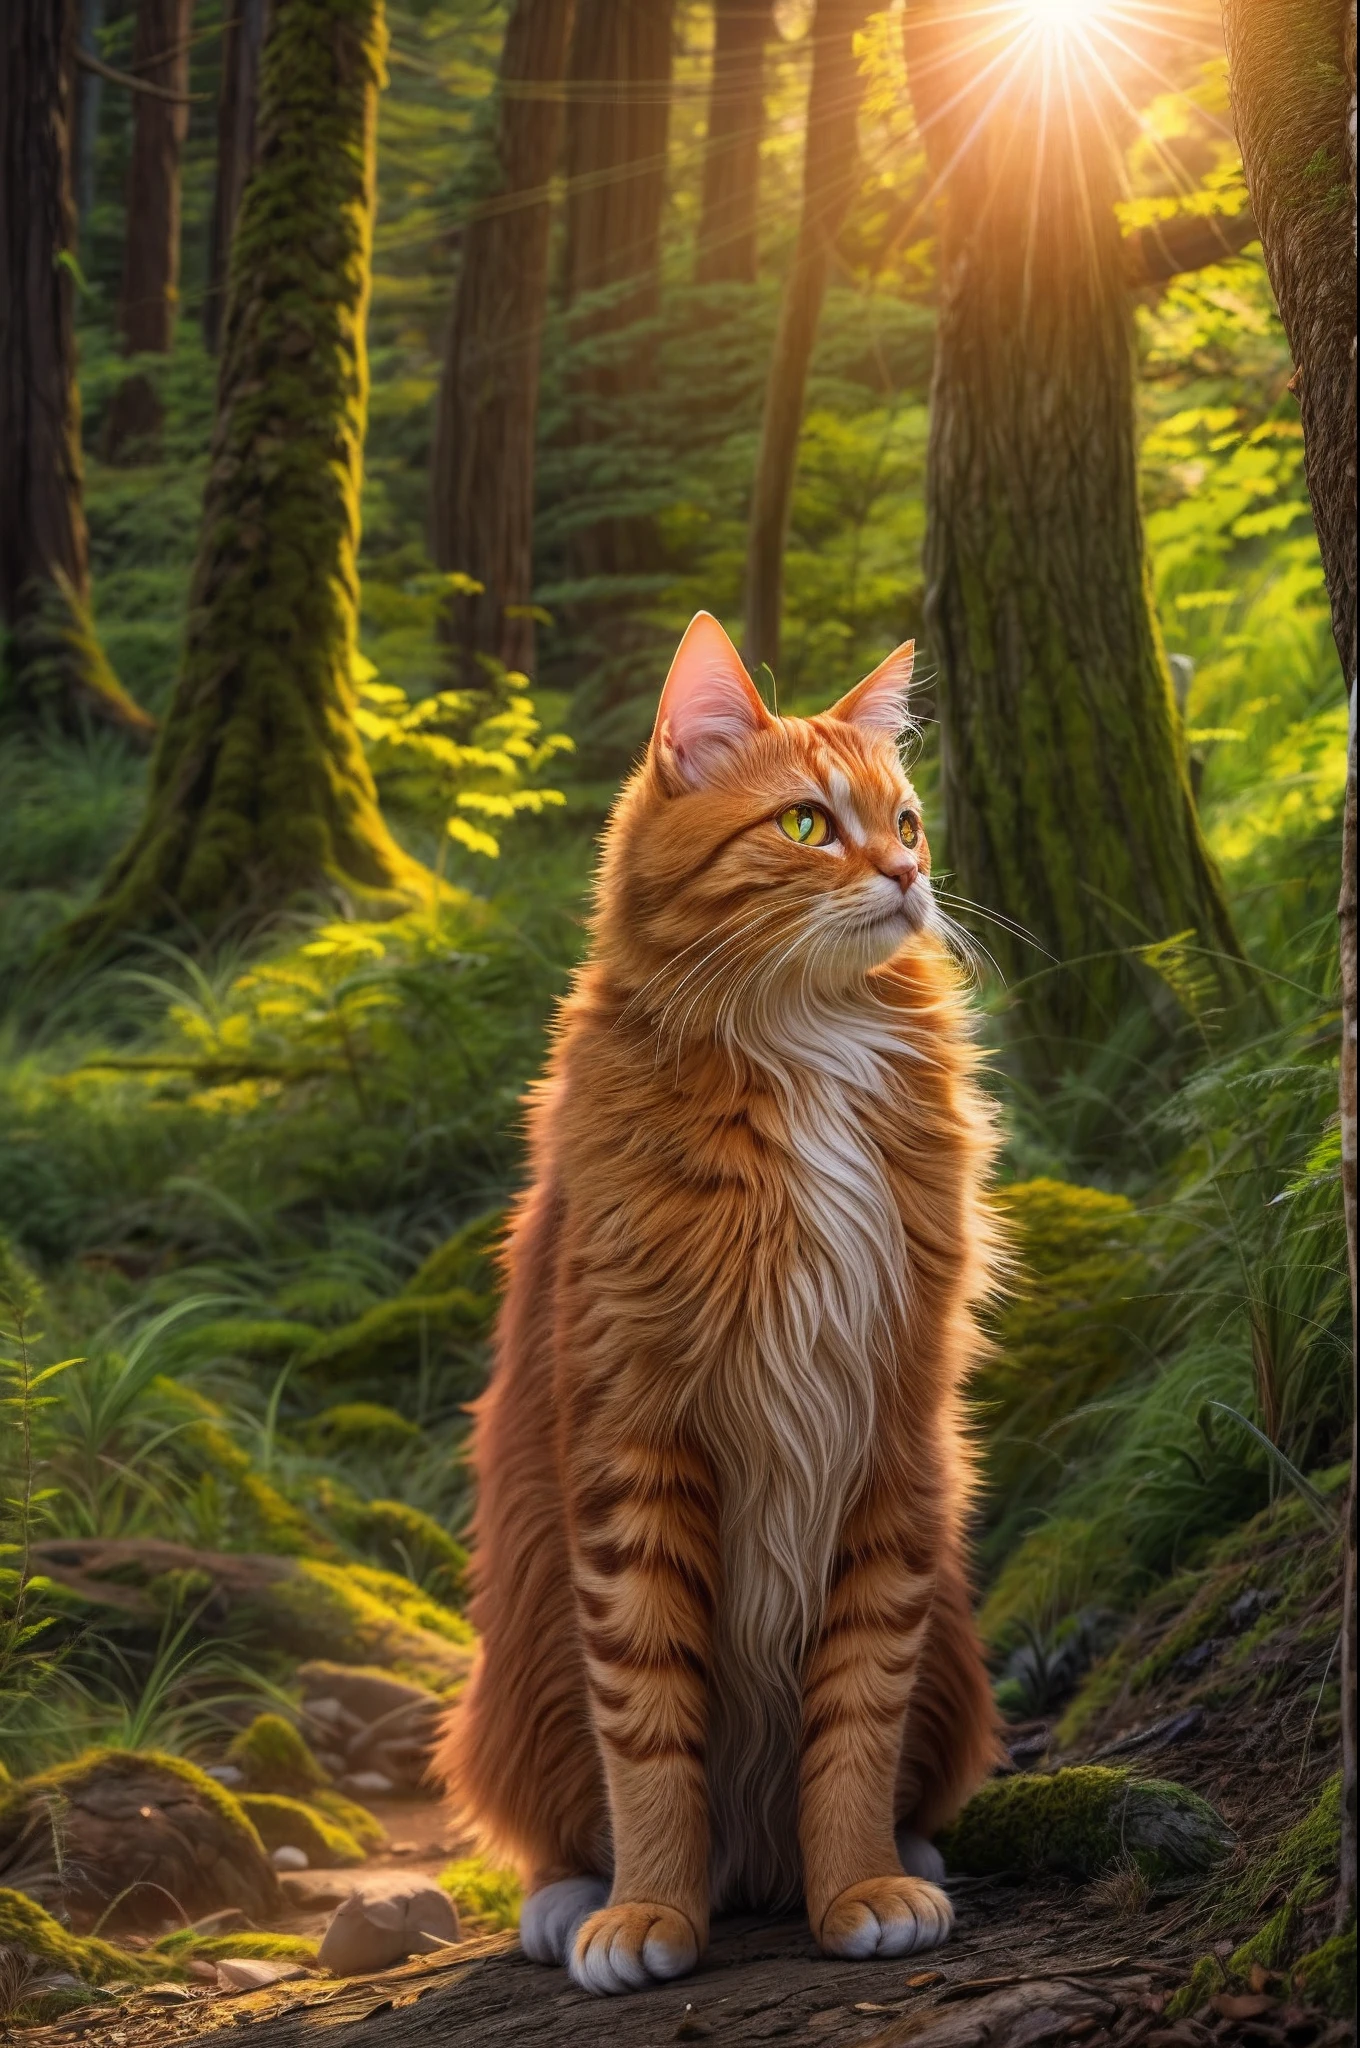 A ginger cat, a wizard in the forest, illuminated by the setting sun.